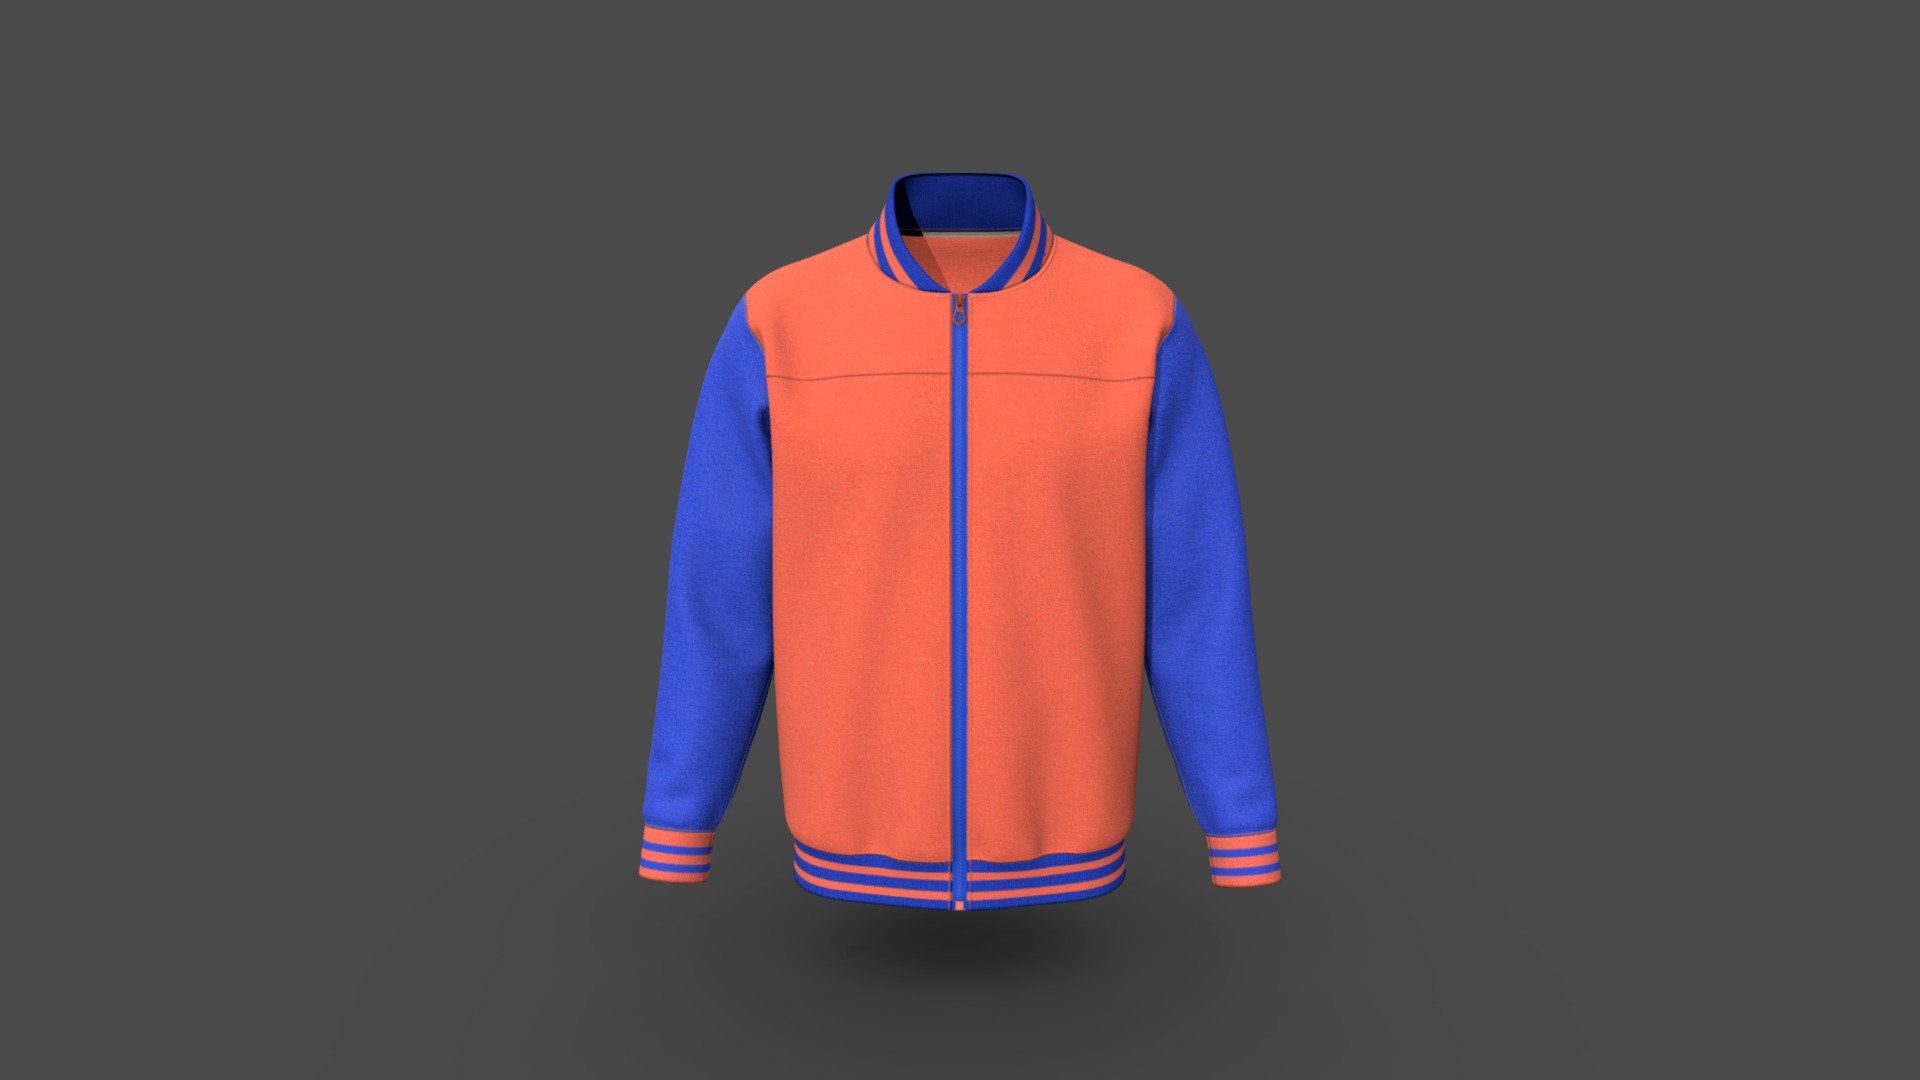 Men Varsity Jacket
Version V1.0

Realistic high detailed Mens Cardigan with high resolution textures. Model created by our unique processing &amp; Optimized for Web and AR / VR. 

Features

Optimized &amp; NON-Optimized obj model with 4K texture included




Optimized for AR/VR/MR

4K &amp; 2K fabric texture and details

Optimized model is 1.63MB

NON-Optimized model is 18.0MB

Knit fabric texture and print details included

GLB file in 2k texture size is 10.9MB

GLB file in 4k texture size is 31.4MB

Suitable for web application configurator development.

Fully unwrap UV

The model has 1 material

Includes high detailed normal map

Unit measurment was inch

Texture map: Base color, OcclusionRoughnessMetallic(ORM), Normal

NB: Tpose &amp; Apose Model available with request.

We make the digital 3D apparel design service affordable and compatible for your fast moving business.
For more details or custom order send email: hello@binarycloth.com


Website:binarycloth.com - Men Varsity Jacket - Buy Royalty Free 3D model by BINARYCLOTH (@binaryclothofficial) 3d model